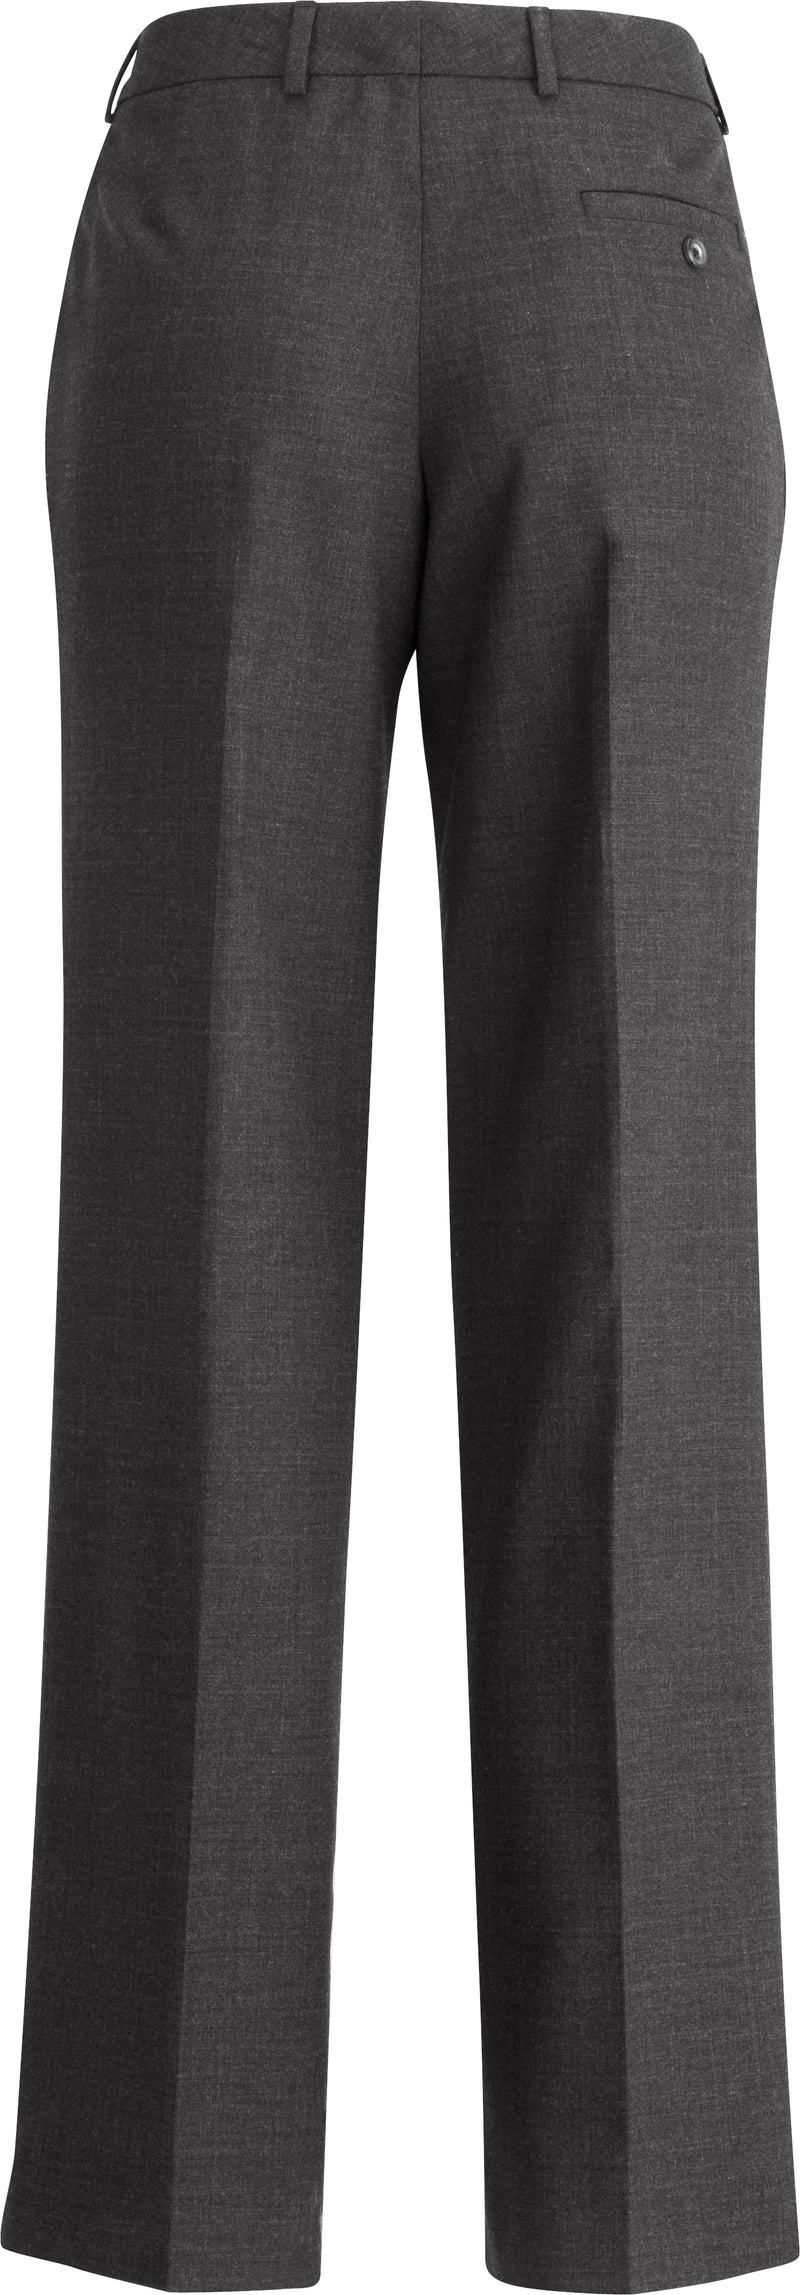 Edwards [8733] Ladies Flat-Front Dress Pant. Redwood & Ross Signature Collection. Live Chat For Bulk Discounts.